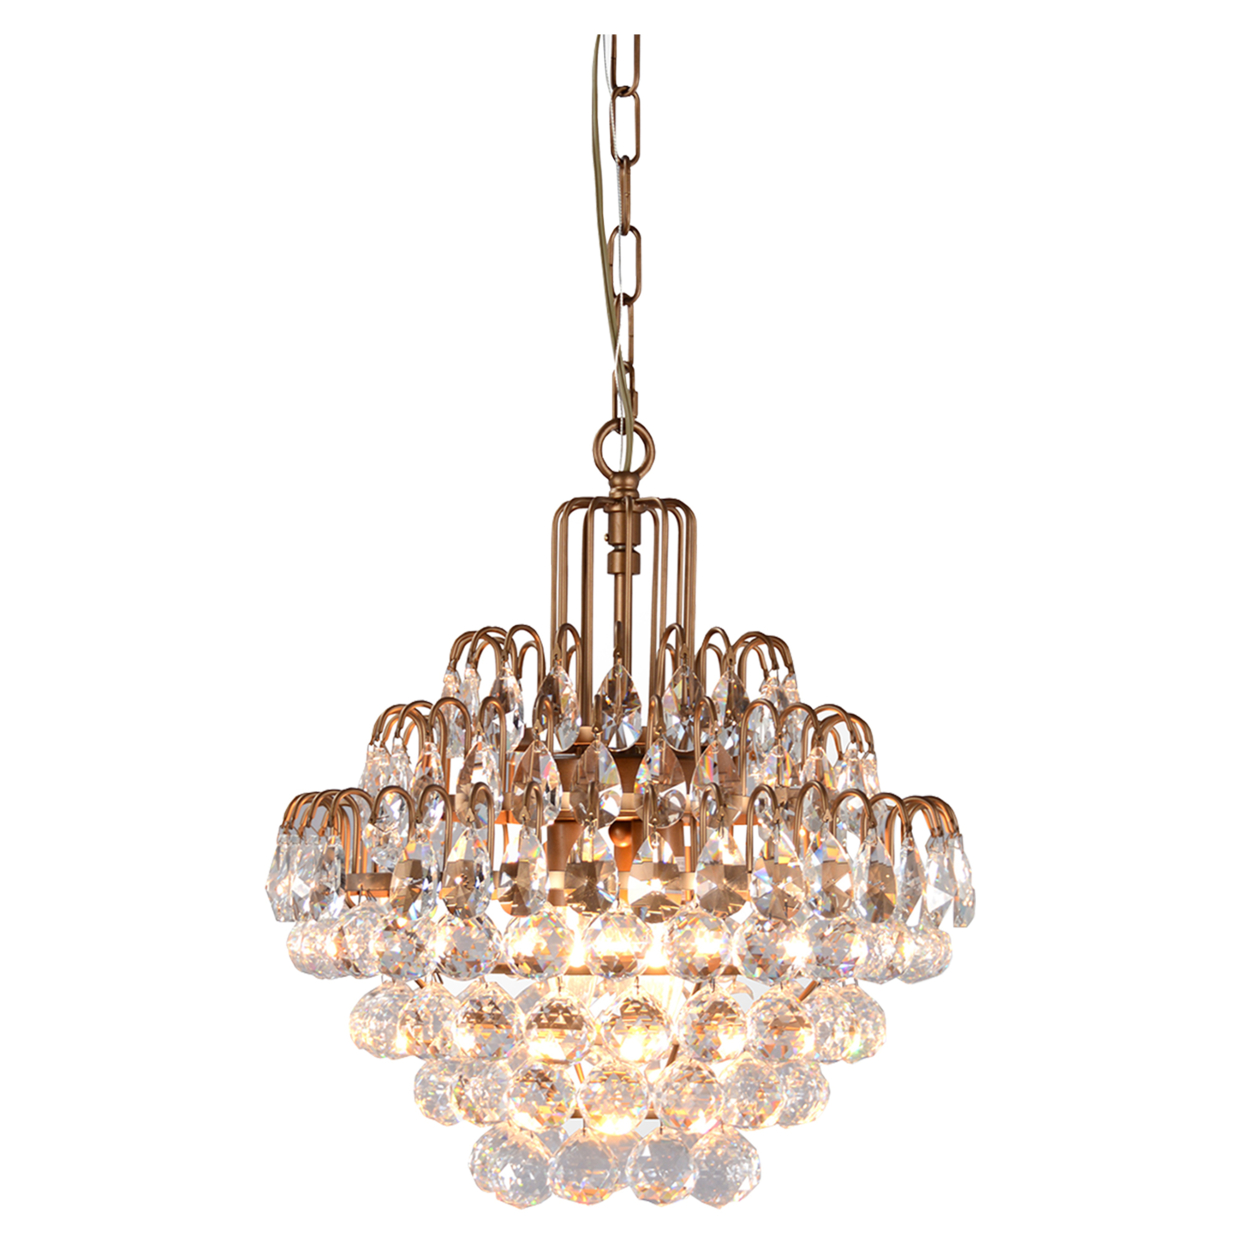 Faceted Crystal Accented 3 Light Chandelier With Metal Chain, Brass- Saltoro Sherpi